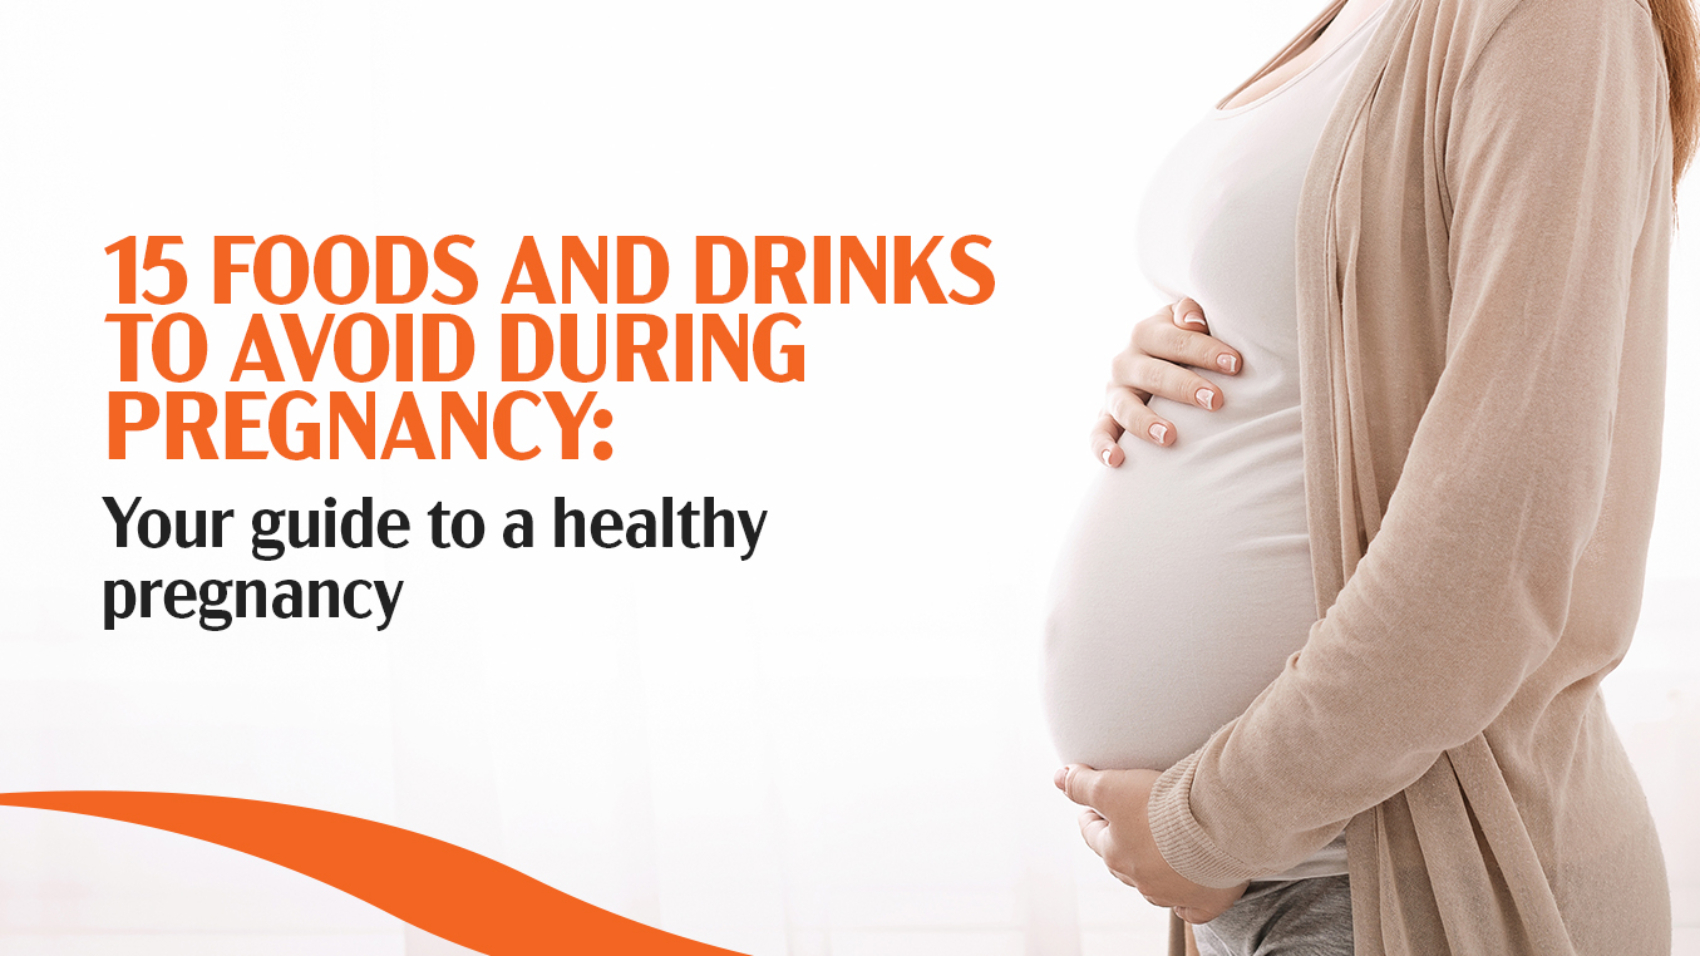 15 Foods and Drinks to Avoid During Pregnancy